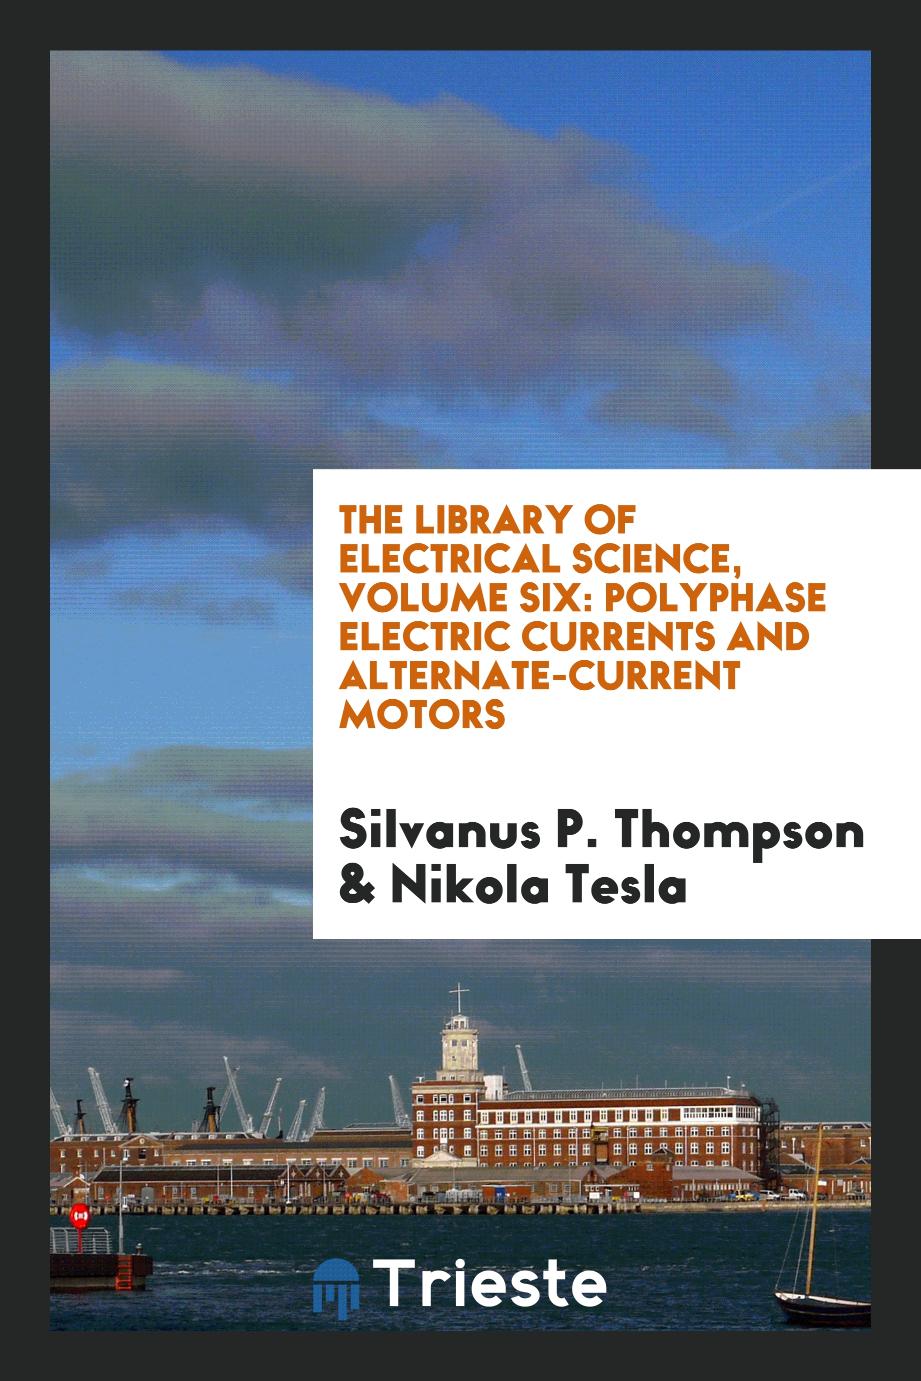 The Library of Electrical Science, Volume Six: Polyphase Electric Currents and Alternate-Current Motors